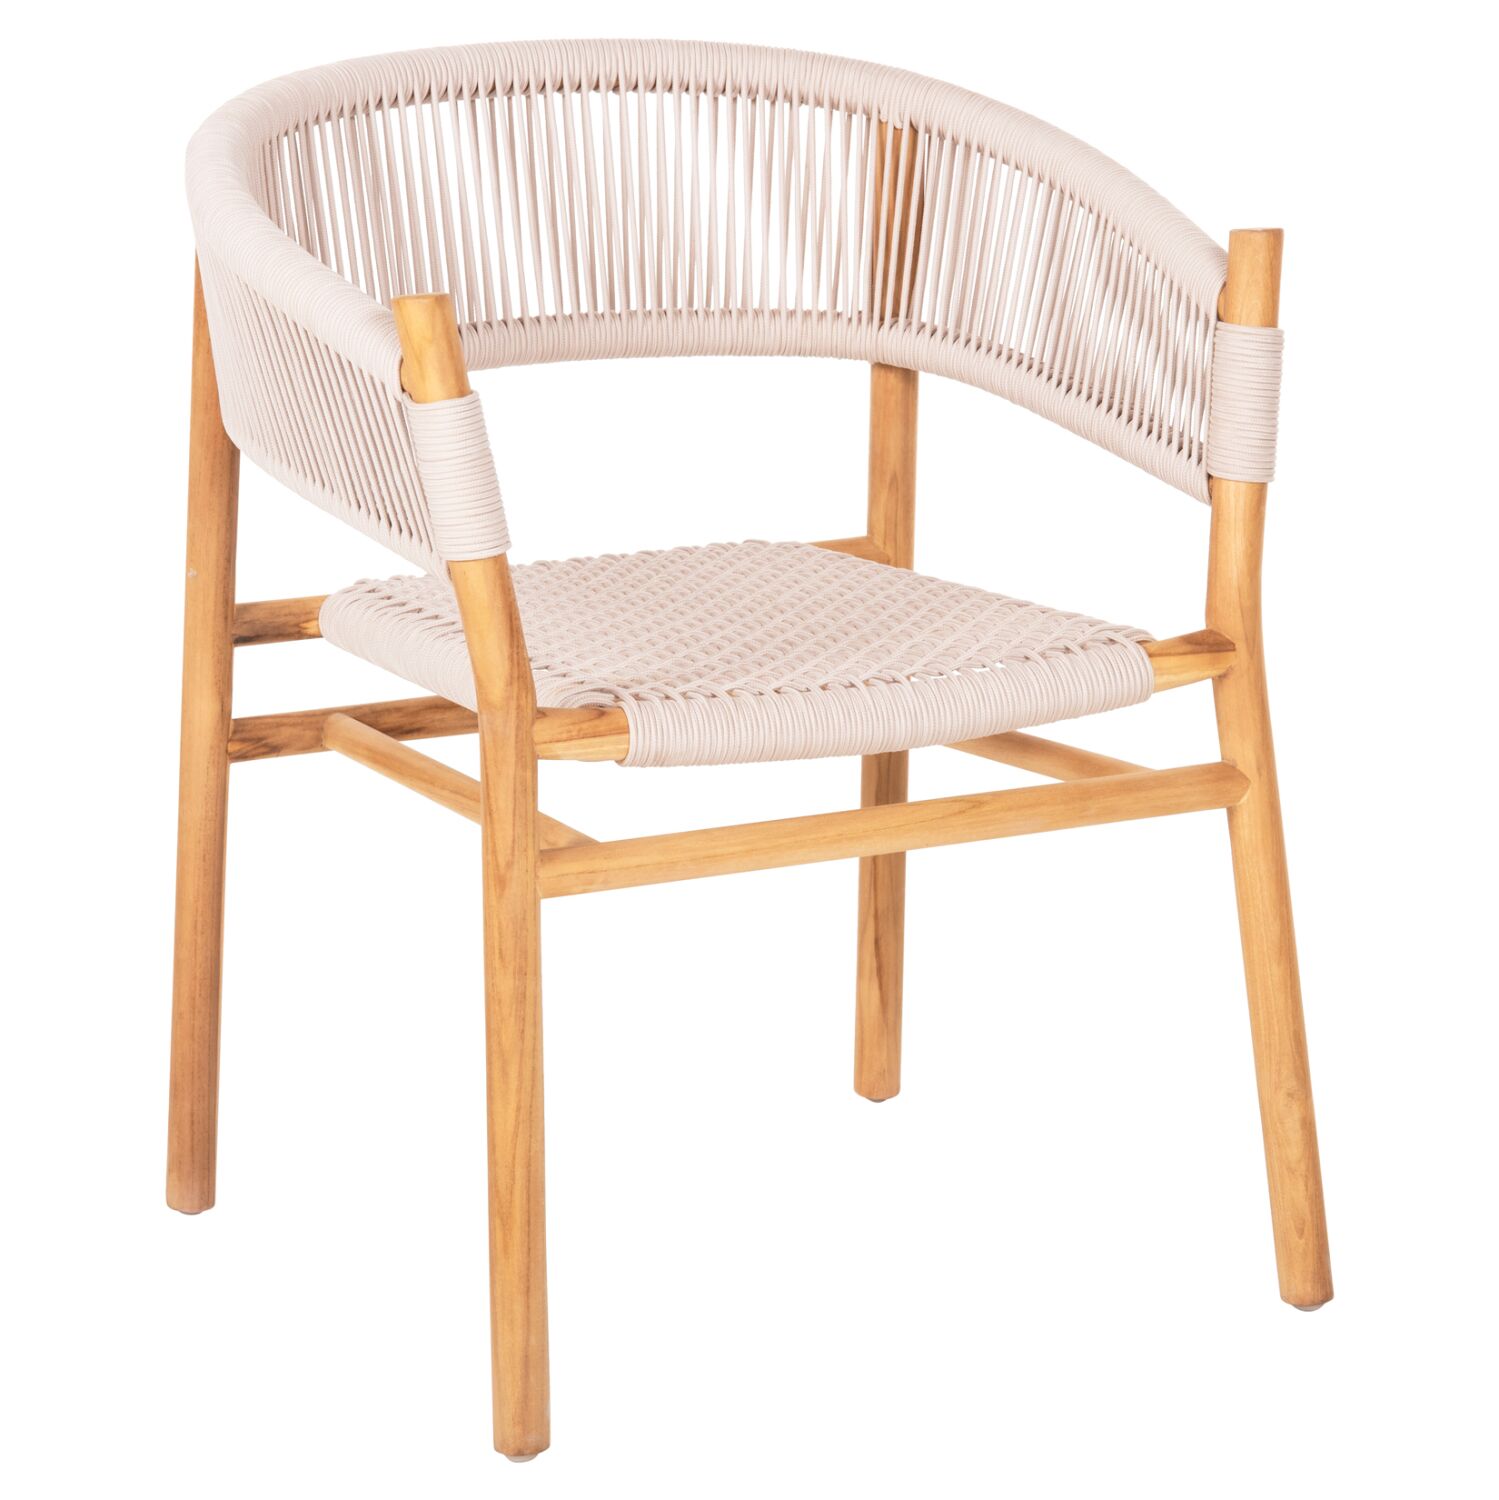 DINING ARMCHAIR IRVING HM9763 TEAK WOOD IN NATURAL COLOR AND BEIGE ROPE 60x55x78Hcm.